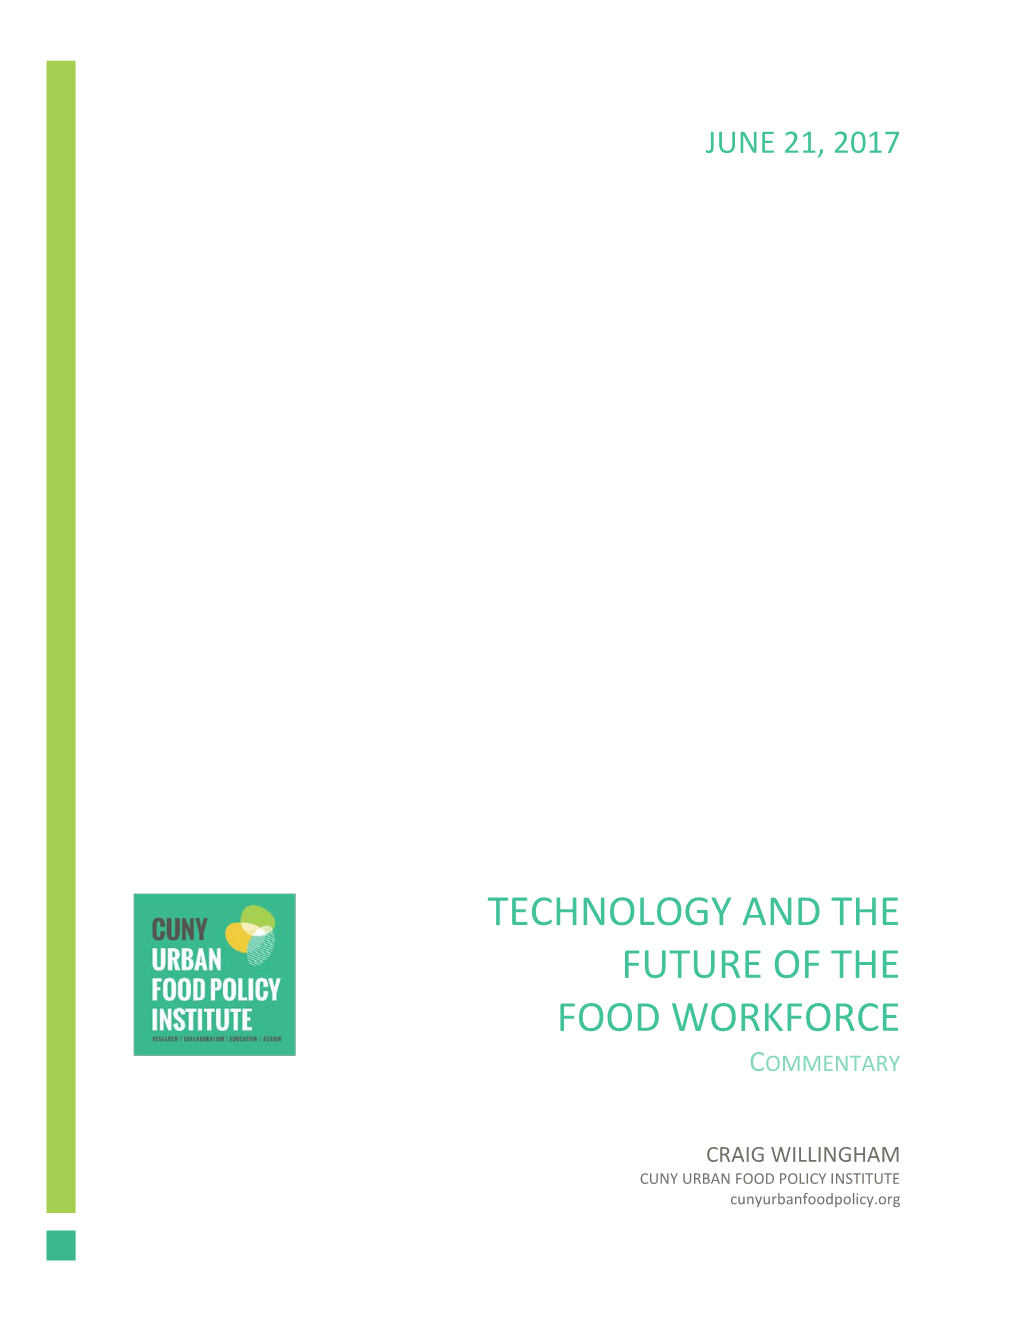 Technology and the Future of the Food Workforce Commentary